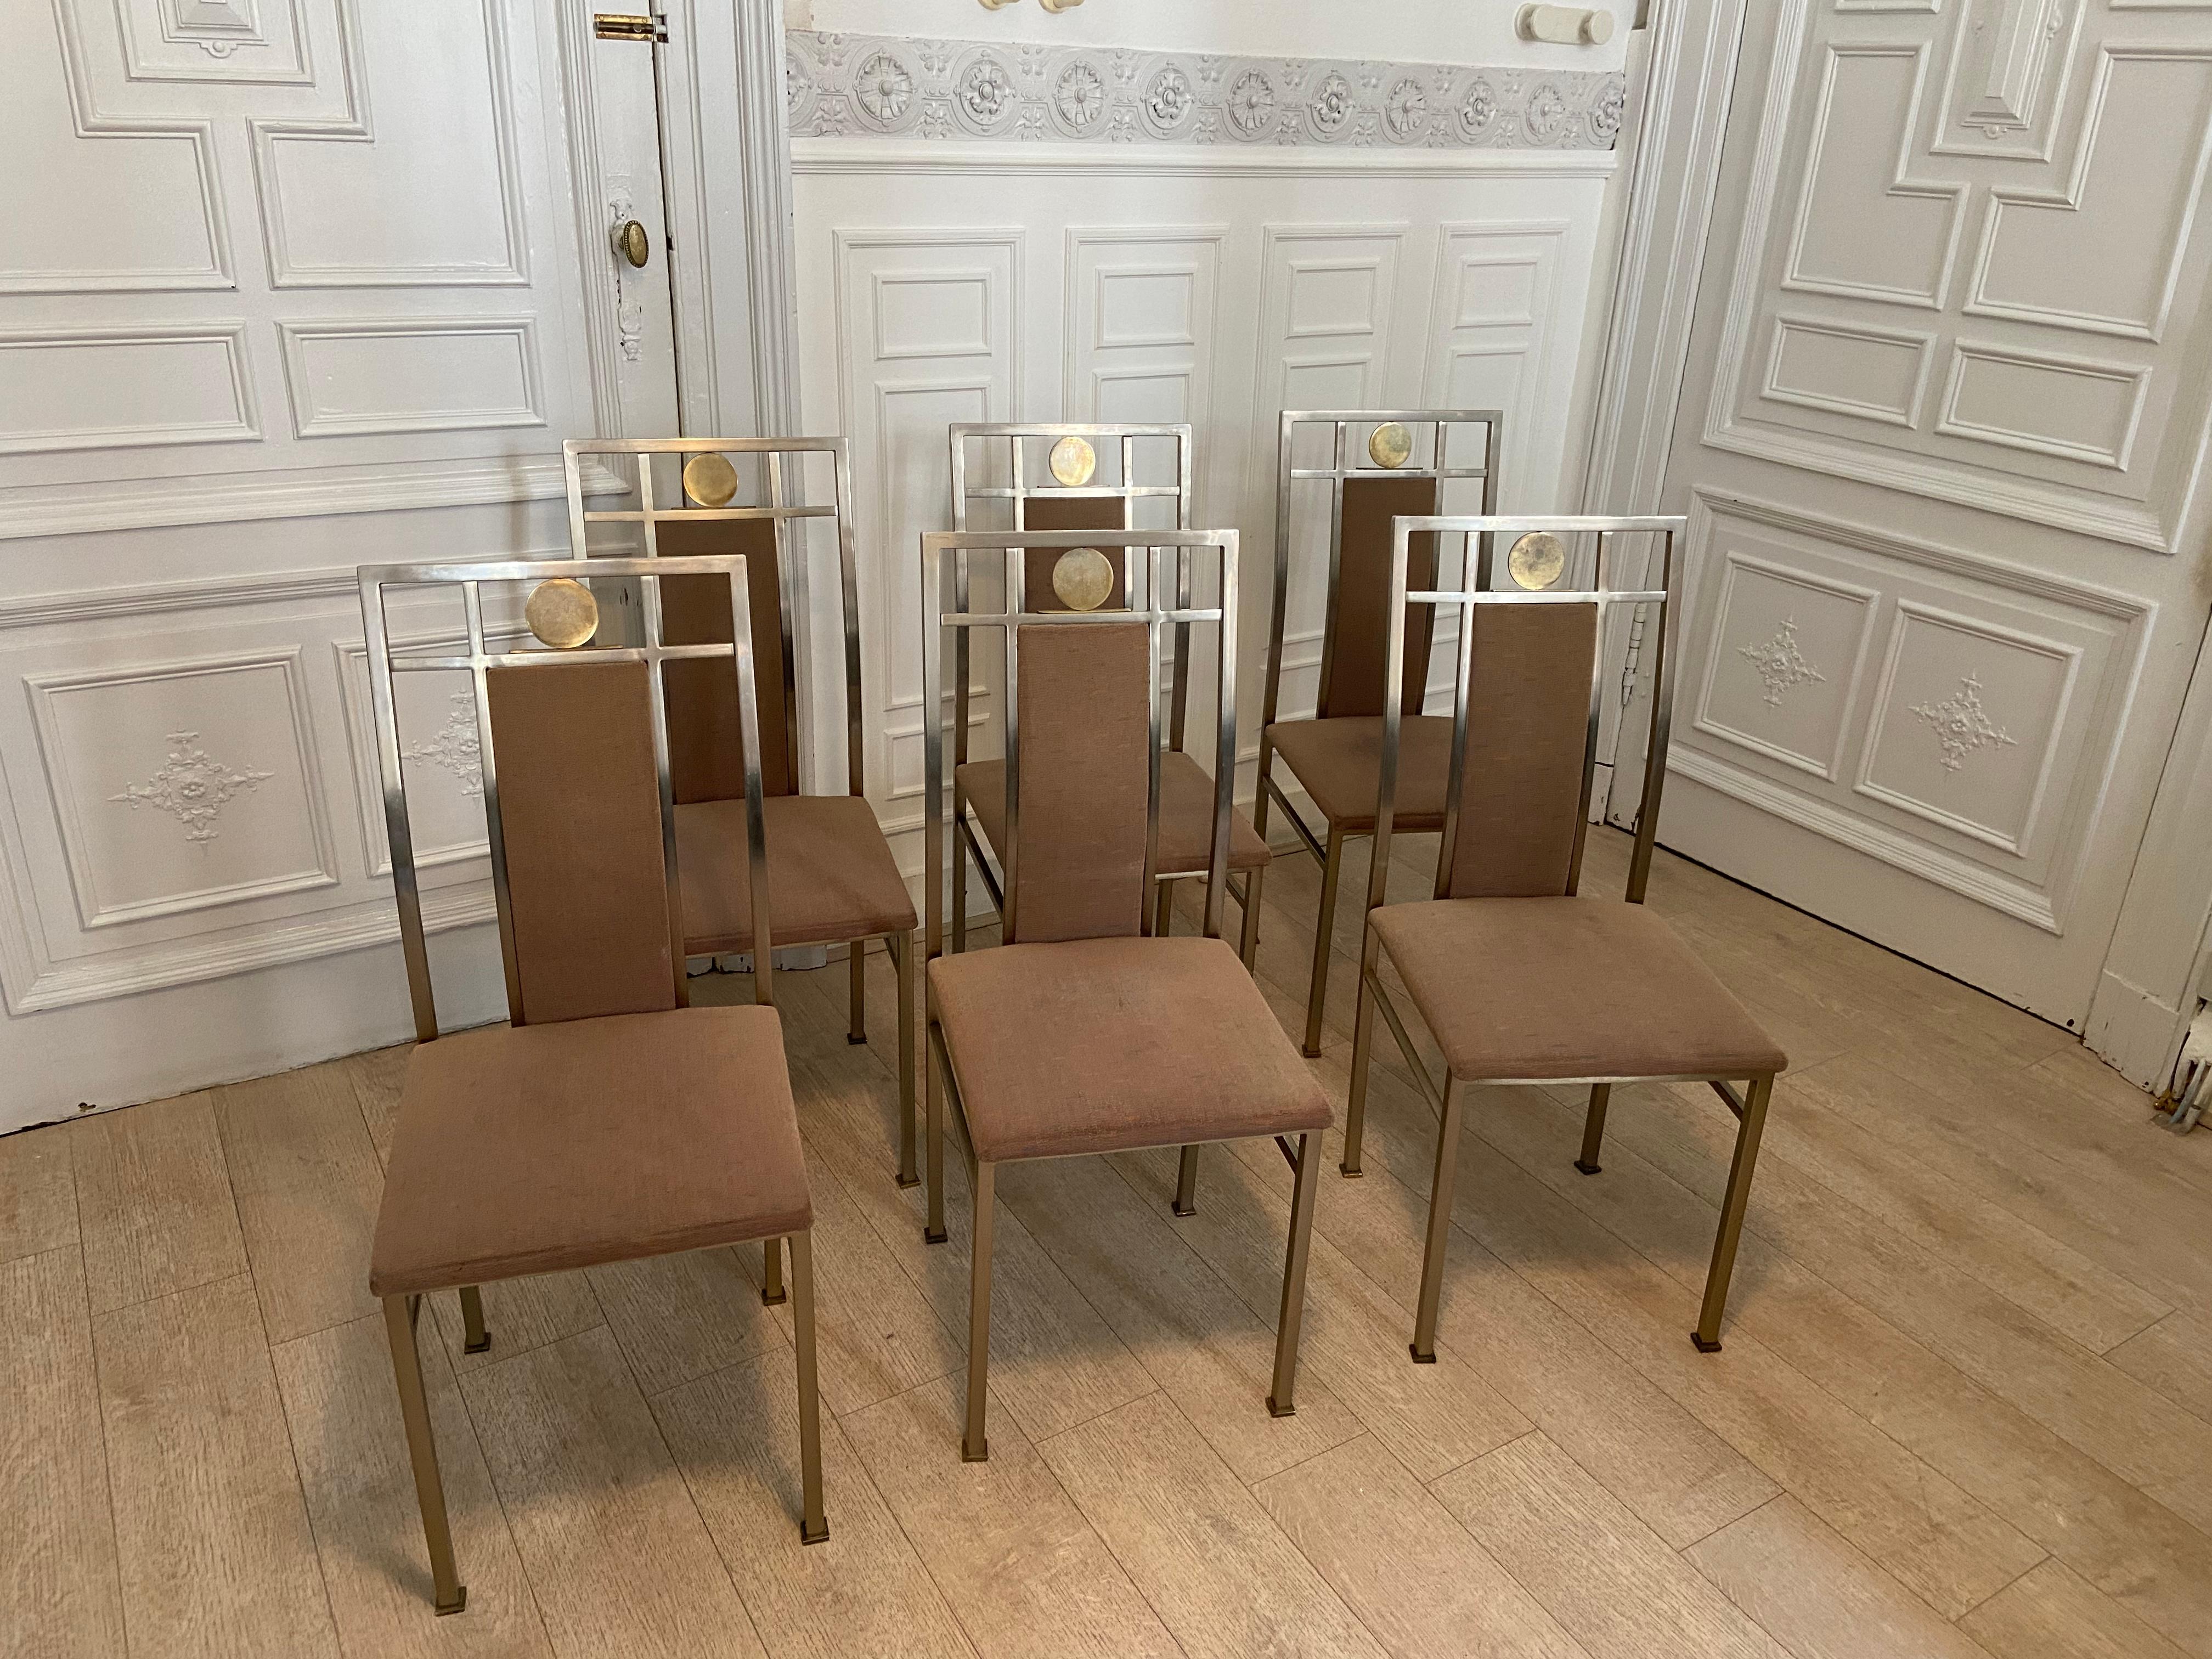 Set of six chairs produced by the Belgian manufacturer belgo chrom in the 80s. Structure in silver metal and golden medallion. Good general condition, consistent signs of wear with age. Seat height: 46.